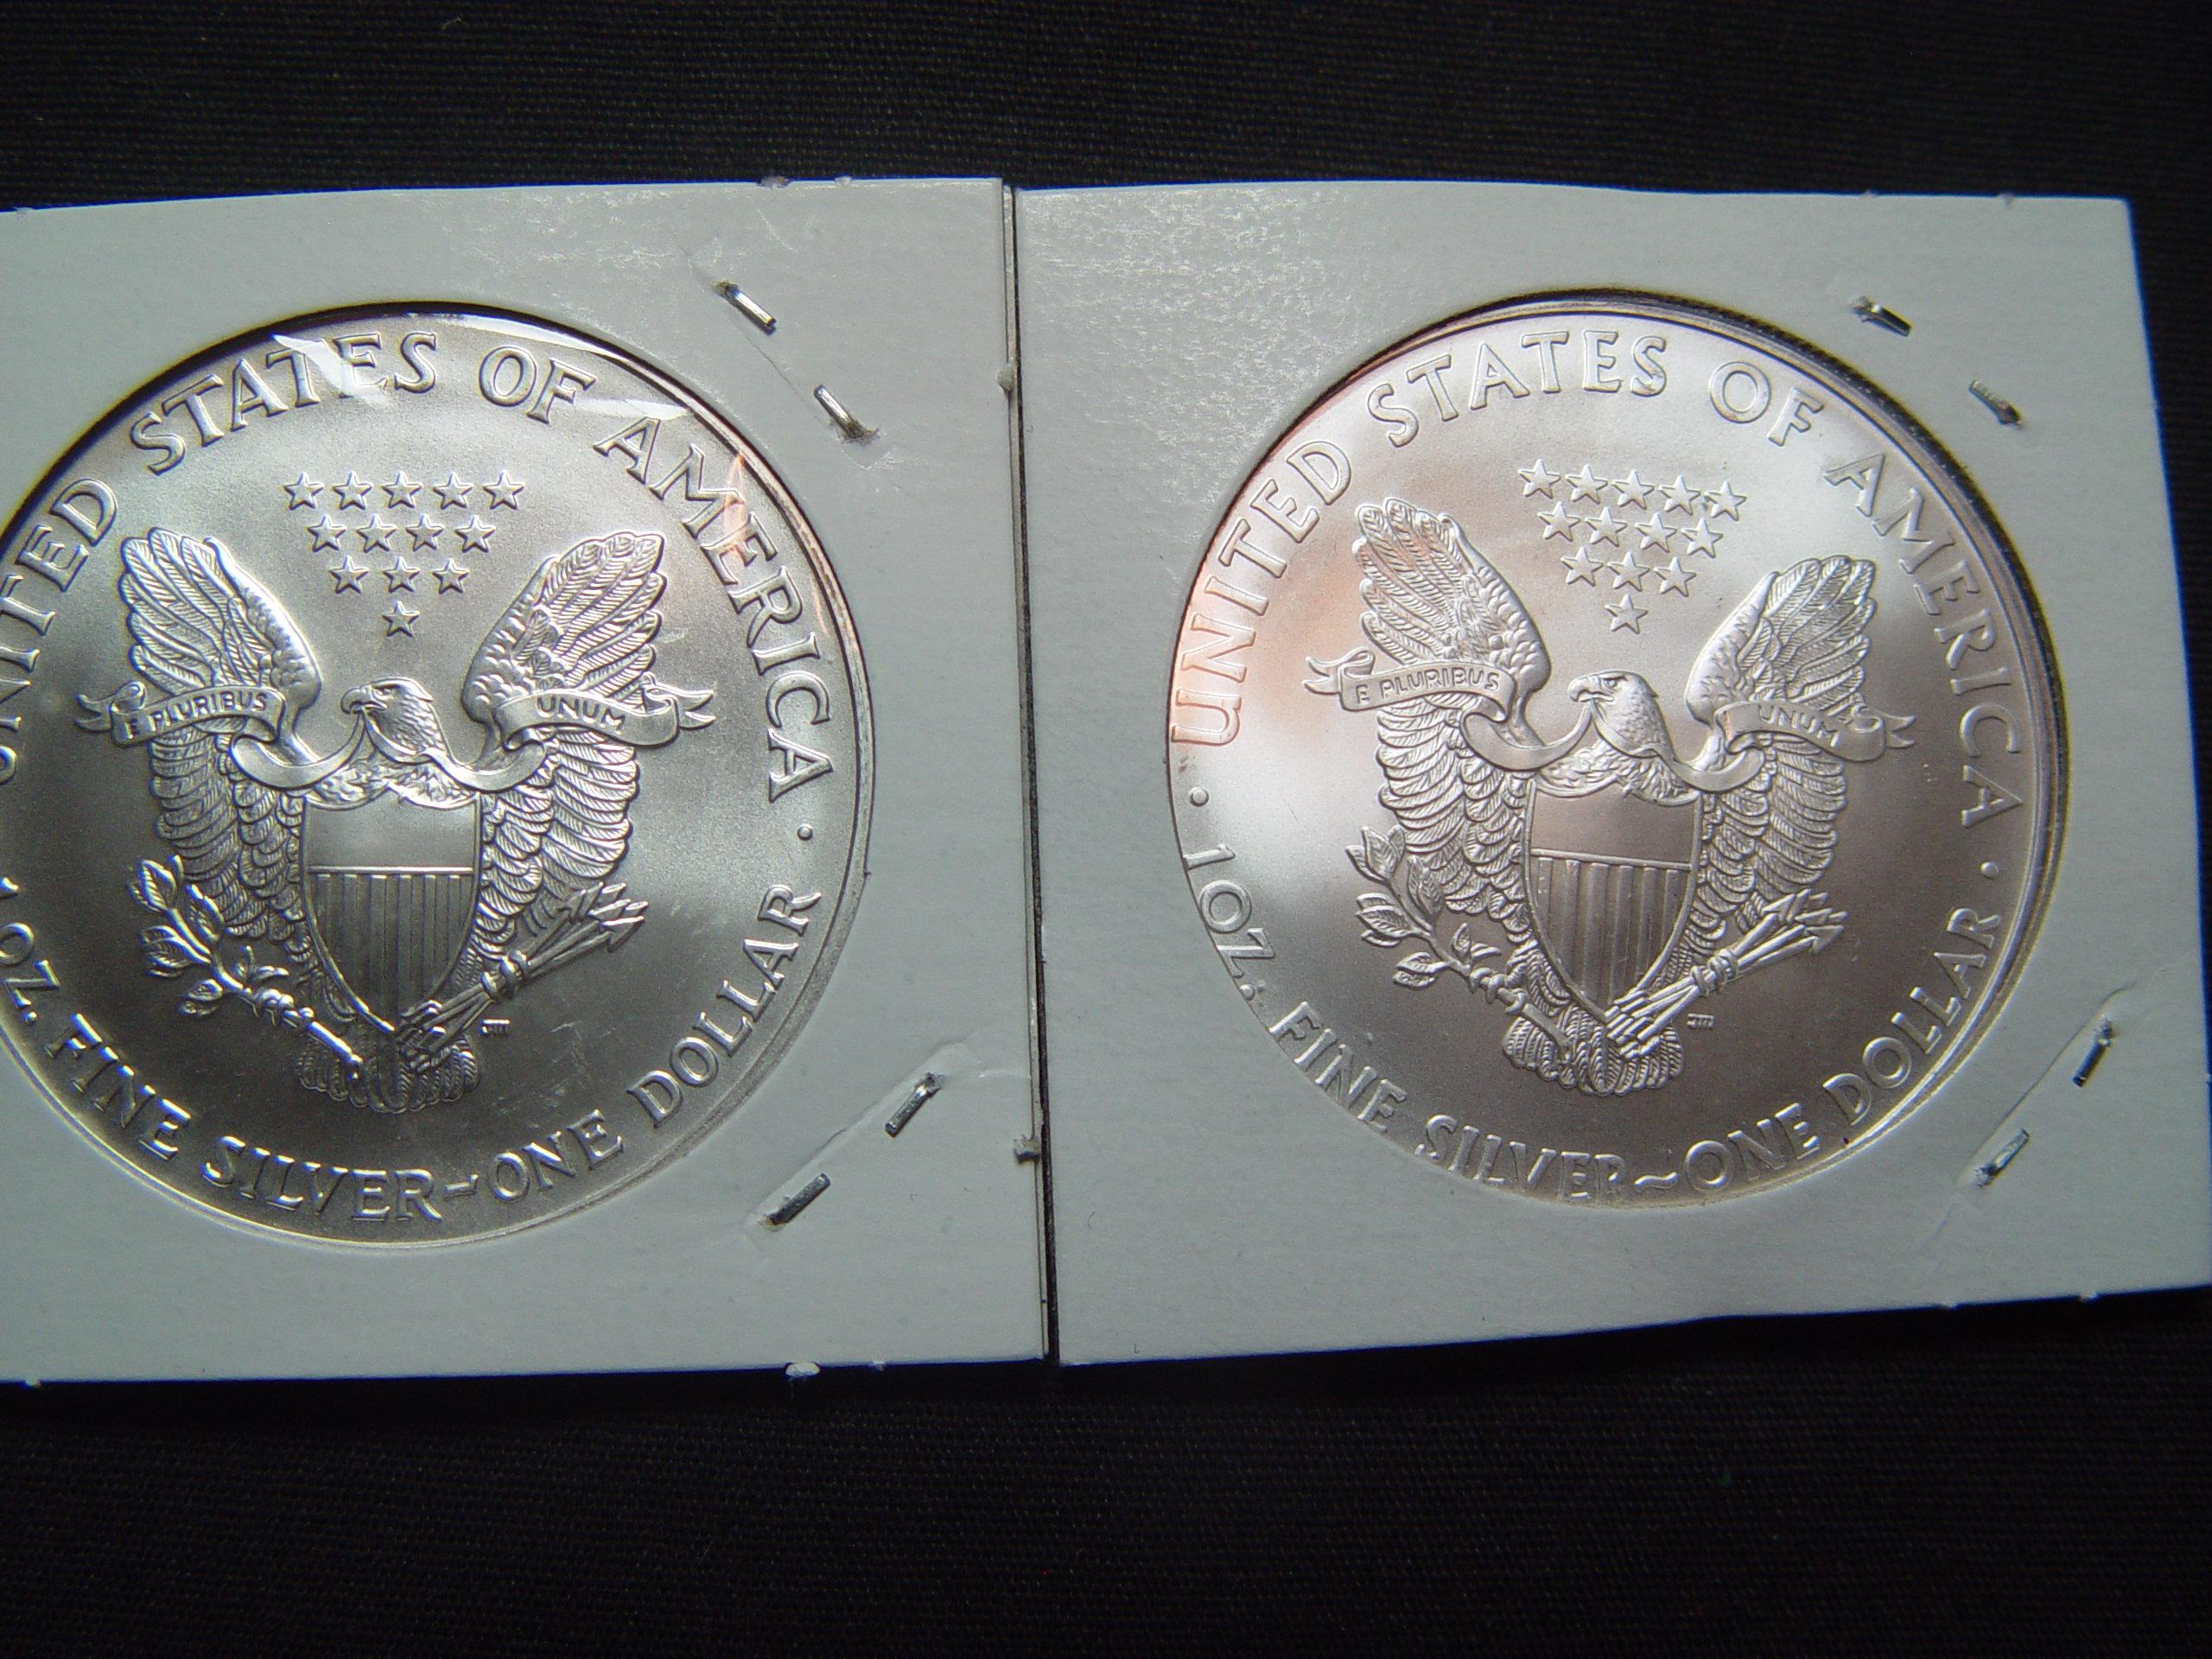 Two $1 Silver American Eagles 2007 & 2010